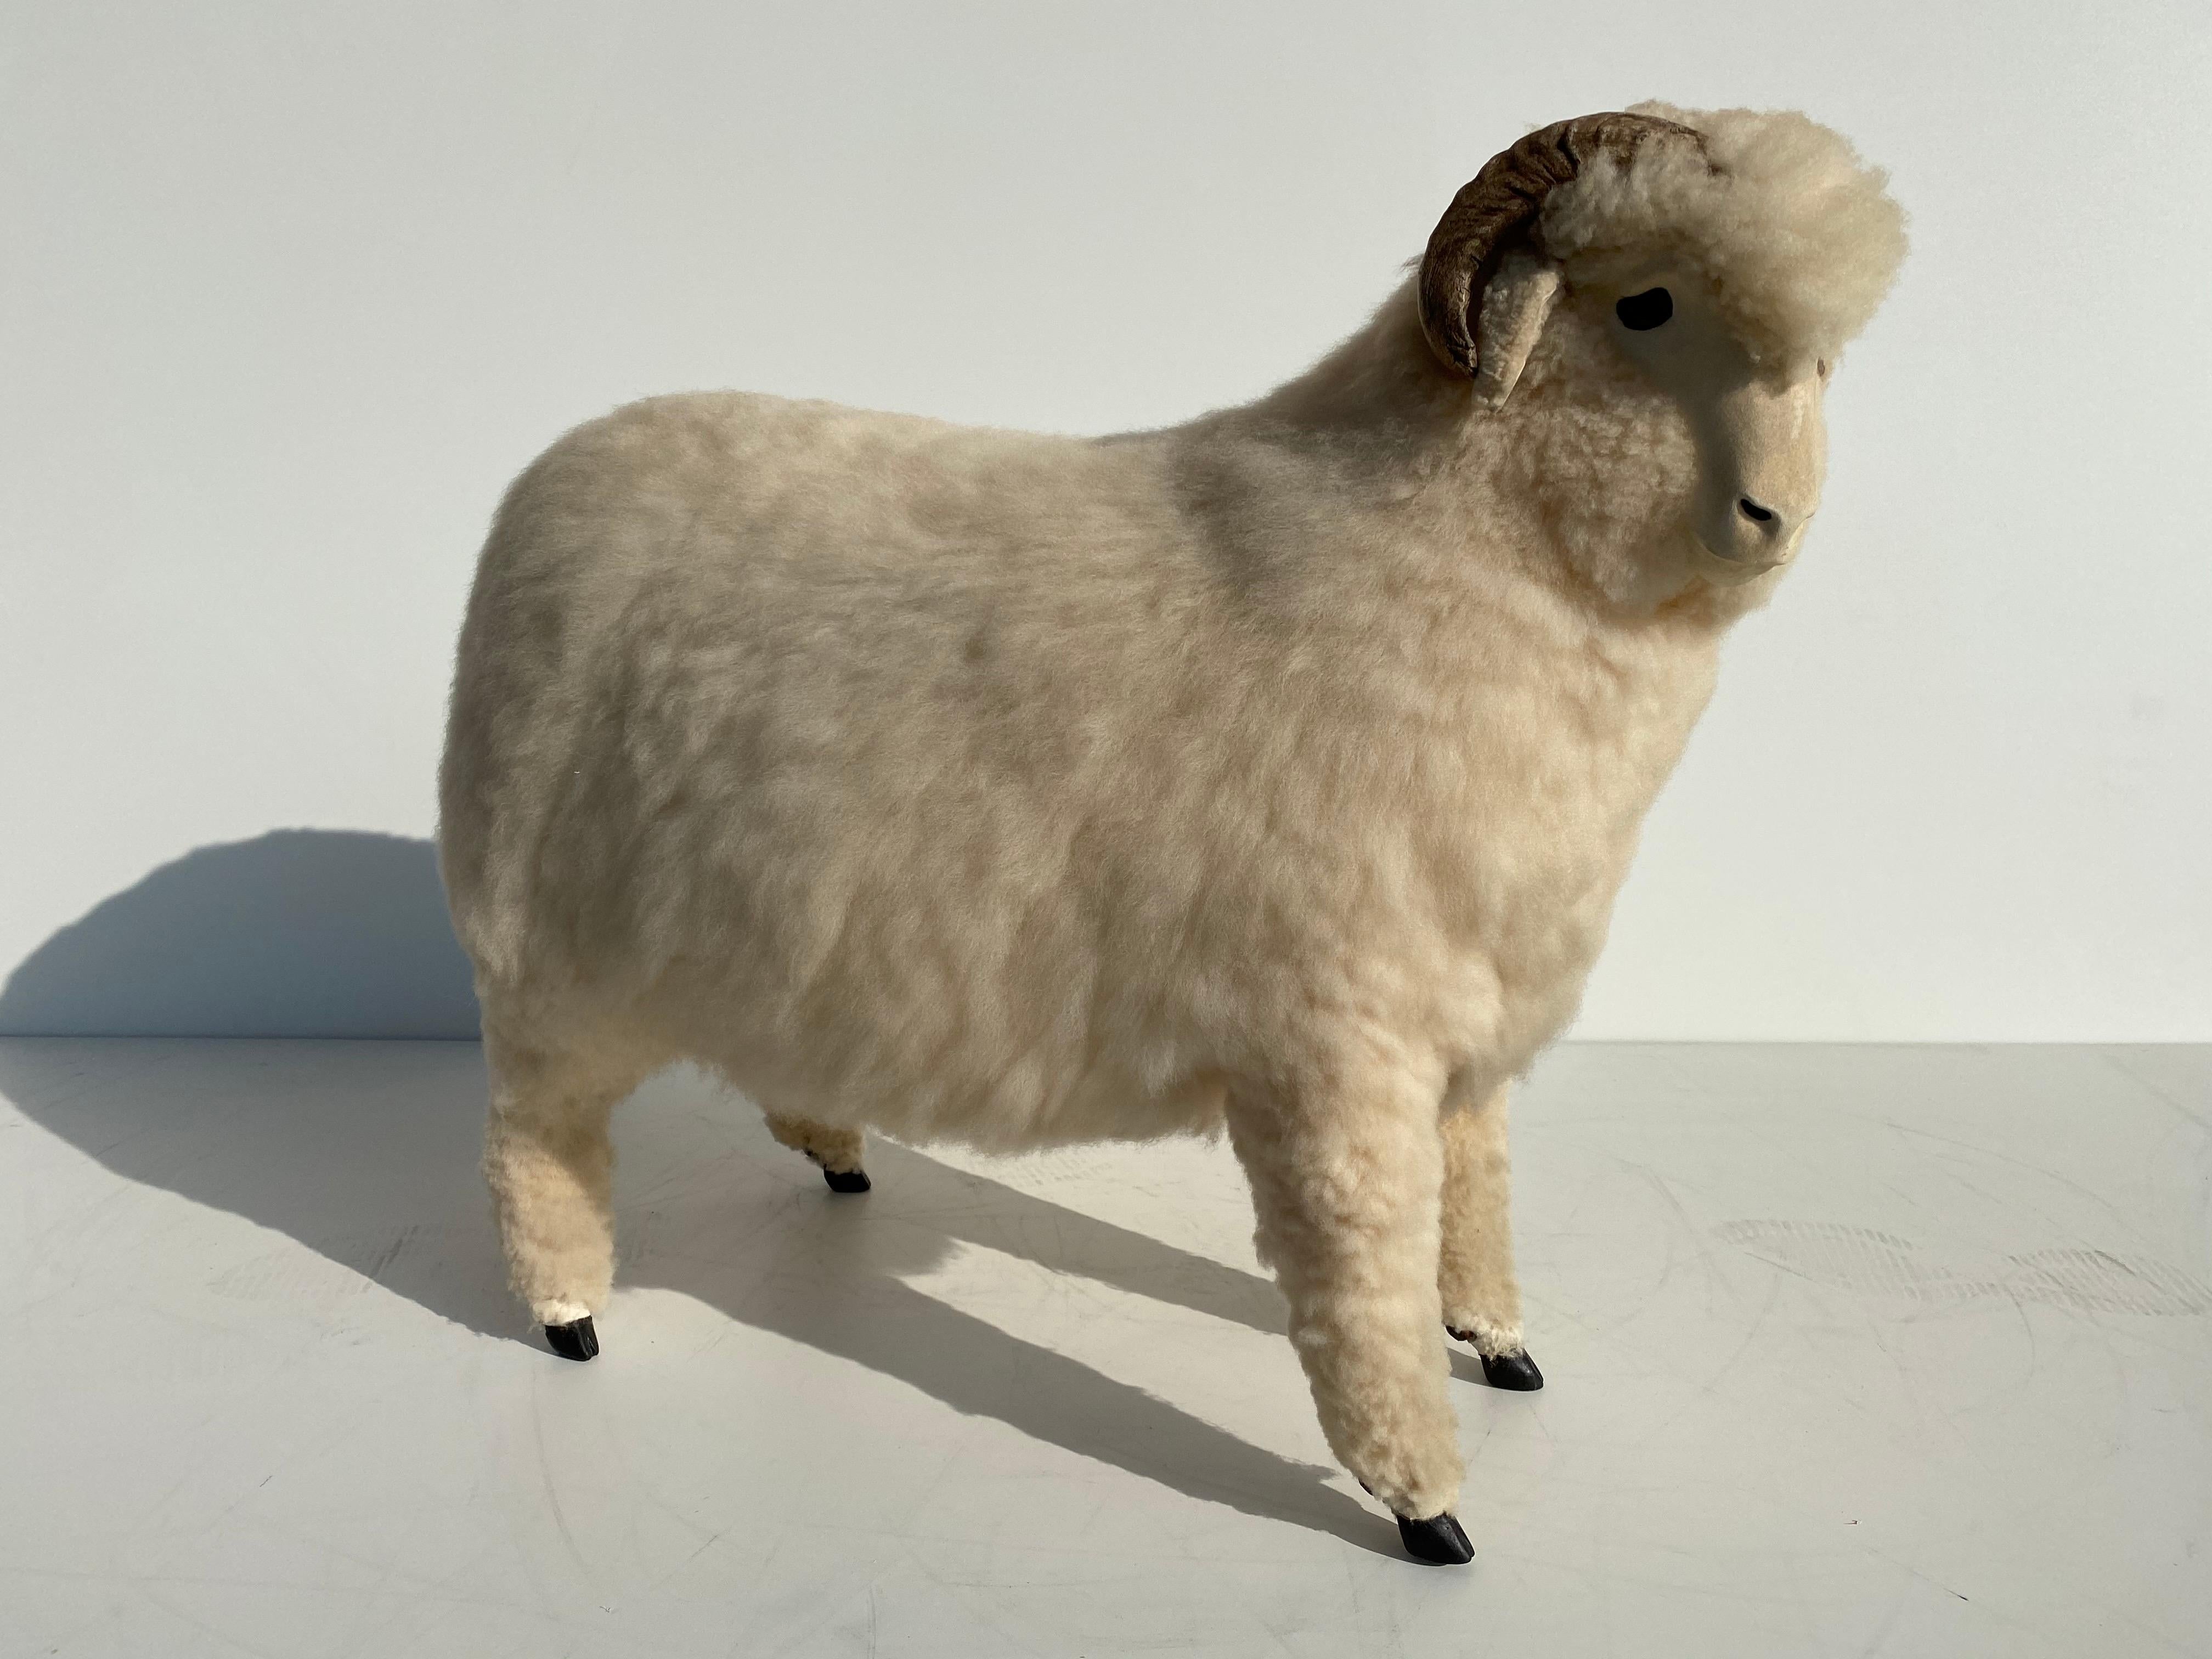 Vintage life-size sheep sculpture footrest in the style of Lalanne.